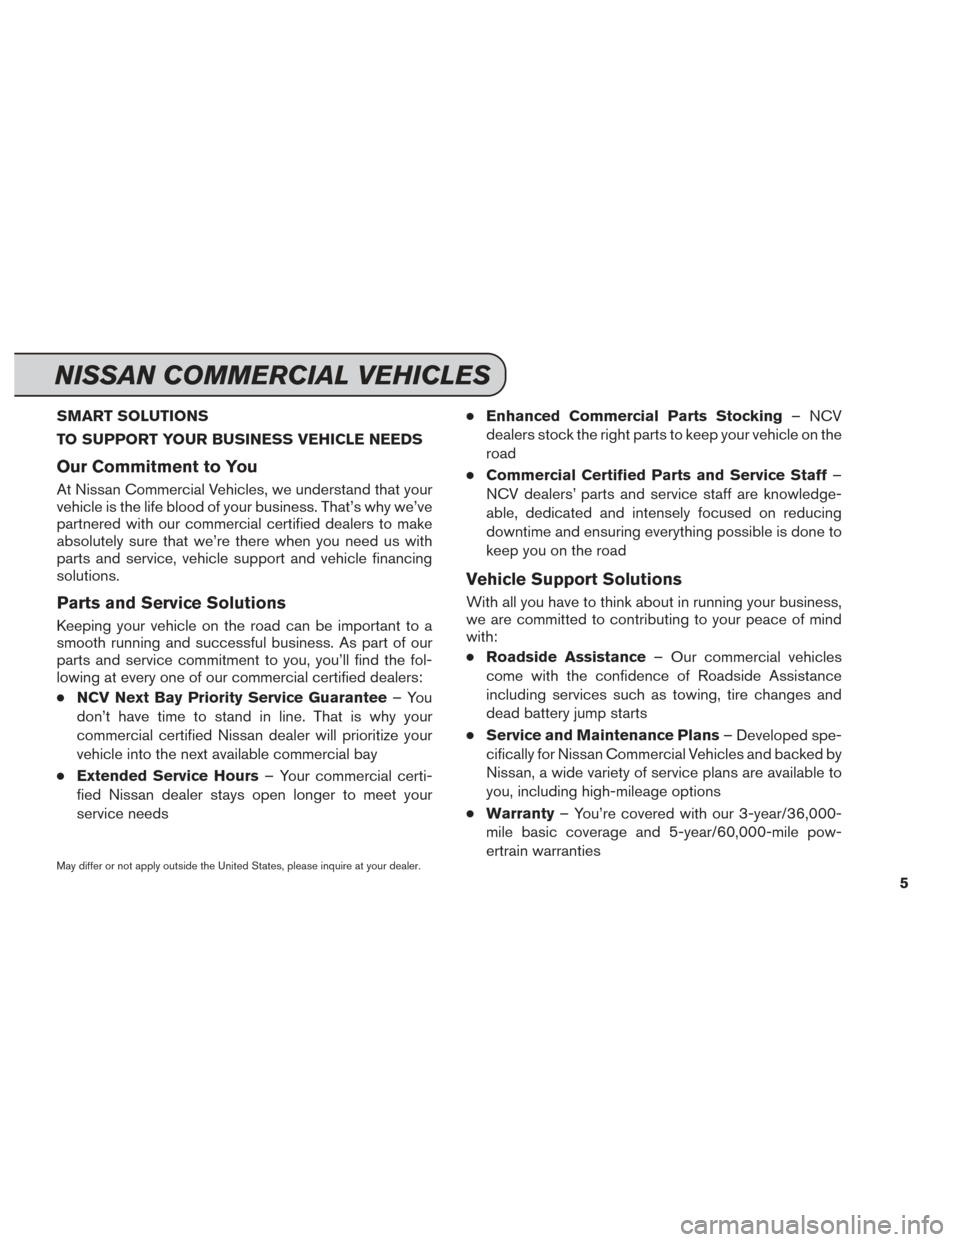 NISSAN CUBE 2014 3.G Service And Maintenance Guide SMART SOLUTIONS
TO SUPPORT YOUR BUSINESS VEHICLE NEEDS
Our Commitment to You
At Nissan Commercial Vehicles, we understand that your
vehicle is the life blood of your business. That’s why we’ve
par